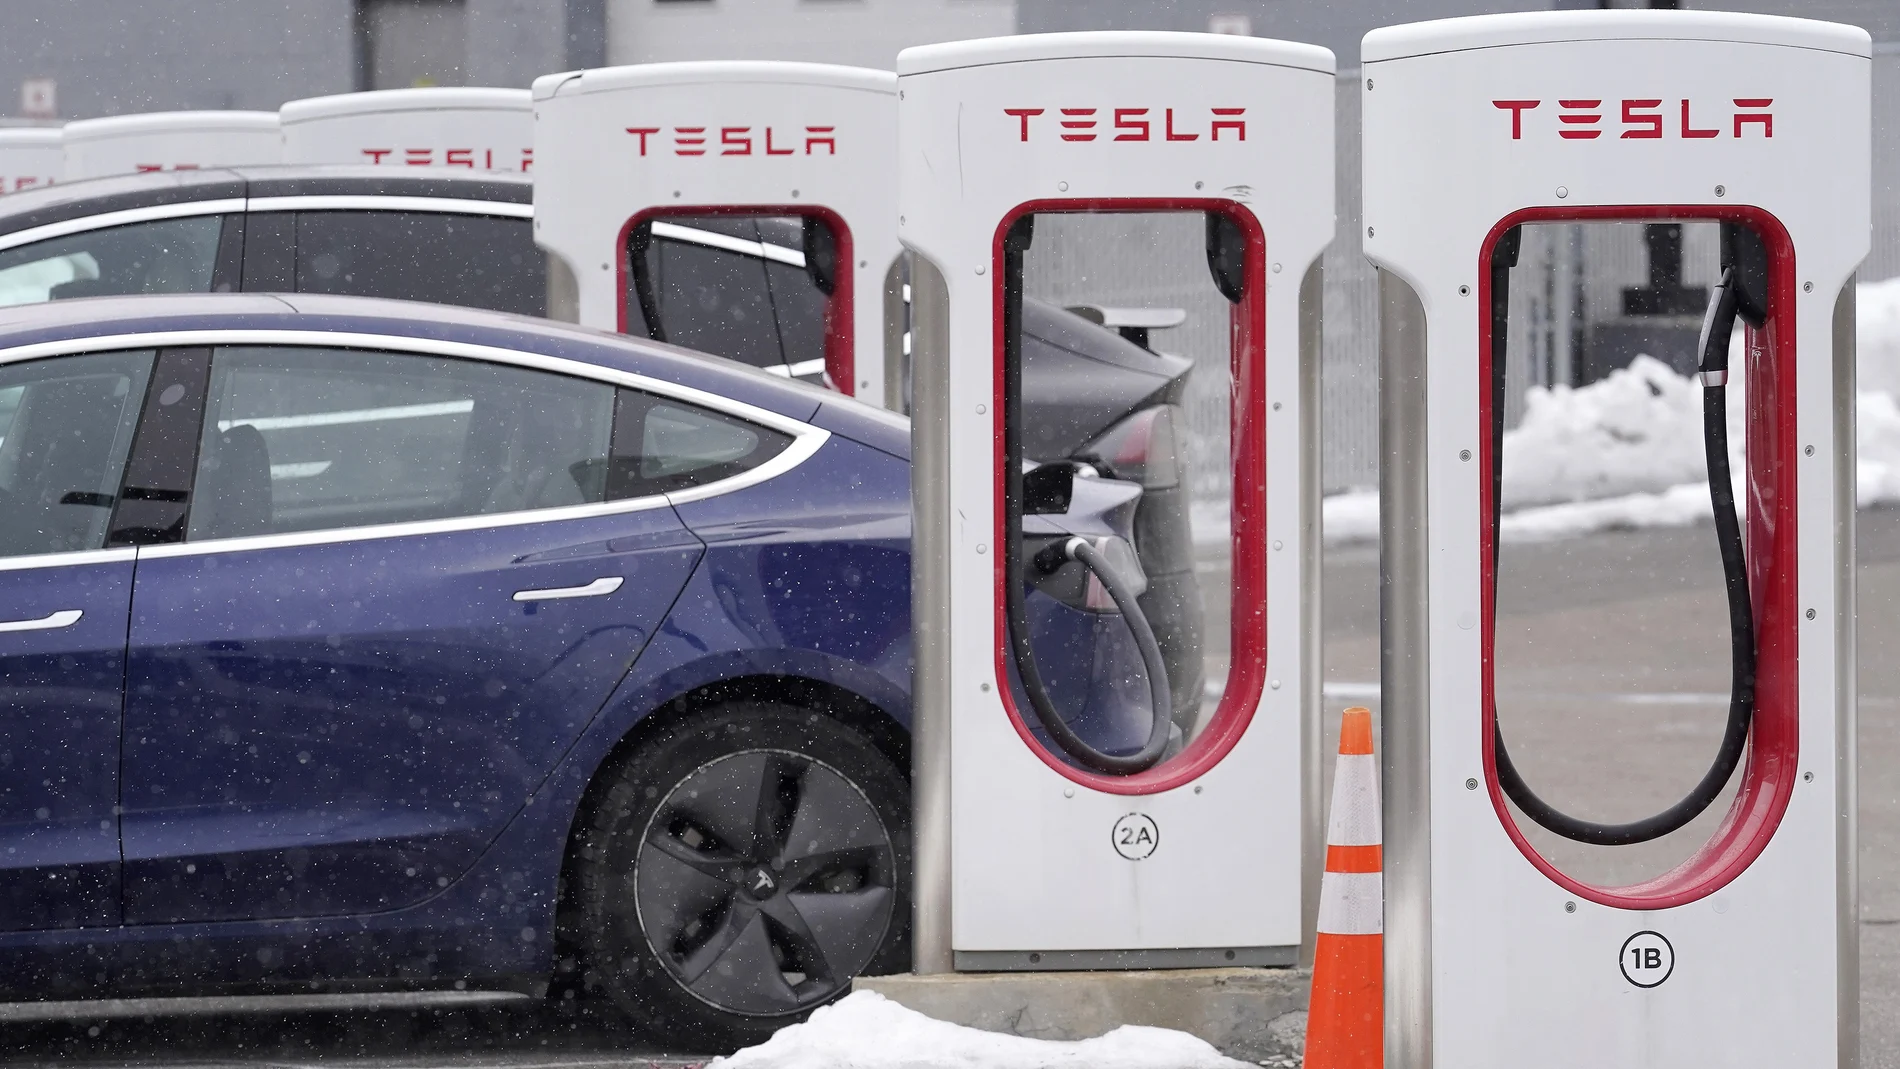 FILE - A Tesla electric vehicle, left, sits in a charging station at a dealership, Thursday, Feb. 18, 2021, in Dedham, Mass. Shares of Tesla and Twitter have tumbled this week as investors deal with the fallout and potential legal issues surrounding Tesla CEO Elon Musk and his $44 billion bid to buy the social media platform. Of the two, Musk's electric vehicle company has fared worse, with its stock down almost 16% so far this week to $728. (AP Photo/Steven Senne, File)